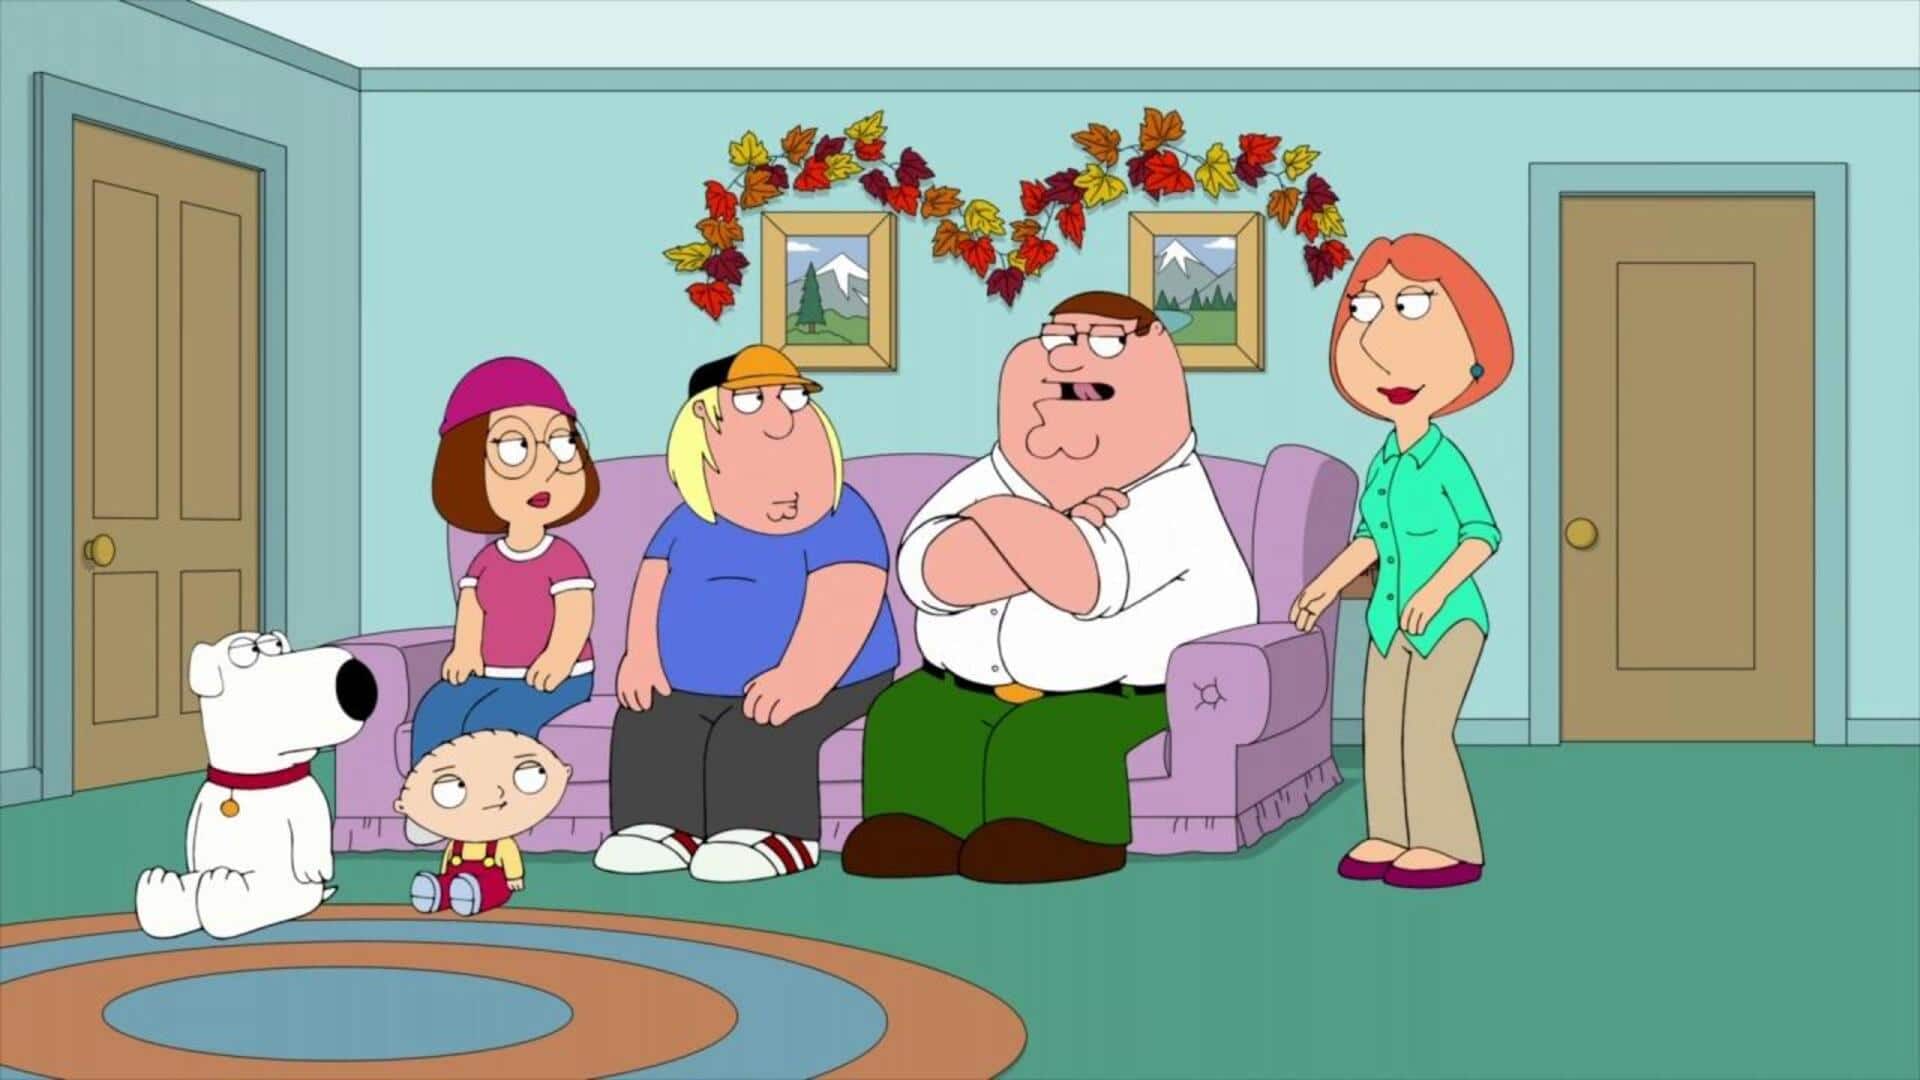 Is Seth Macfarlane planning the 'Family Guy' movie? He reveals